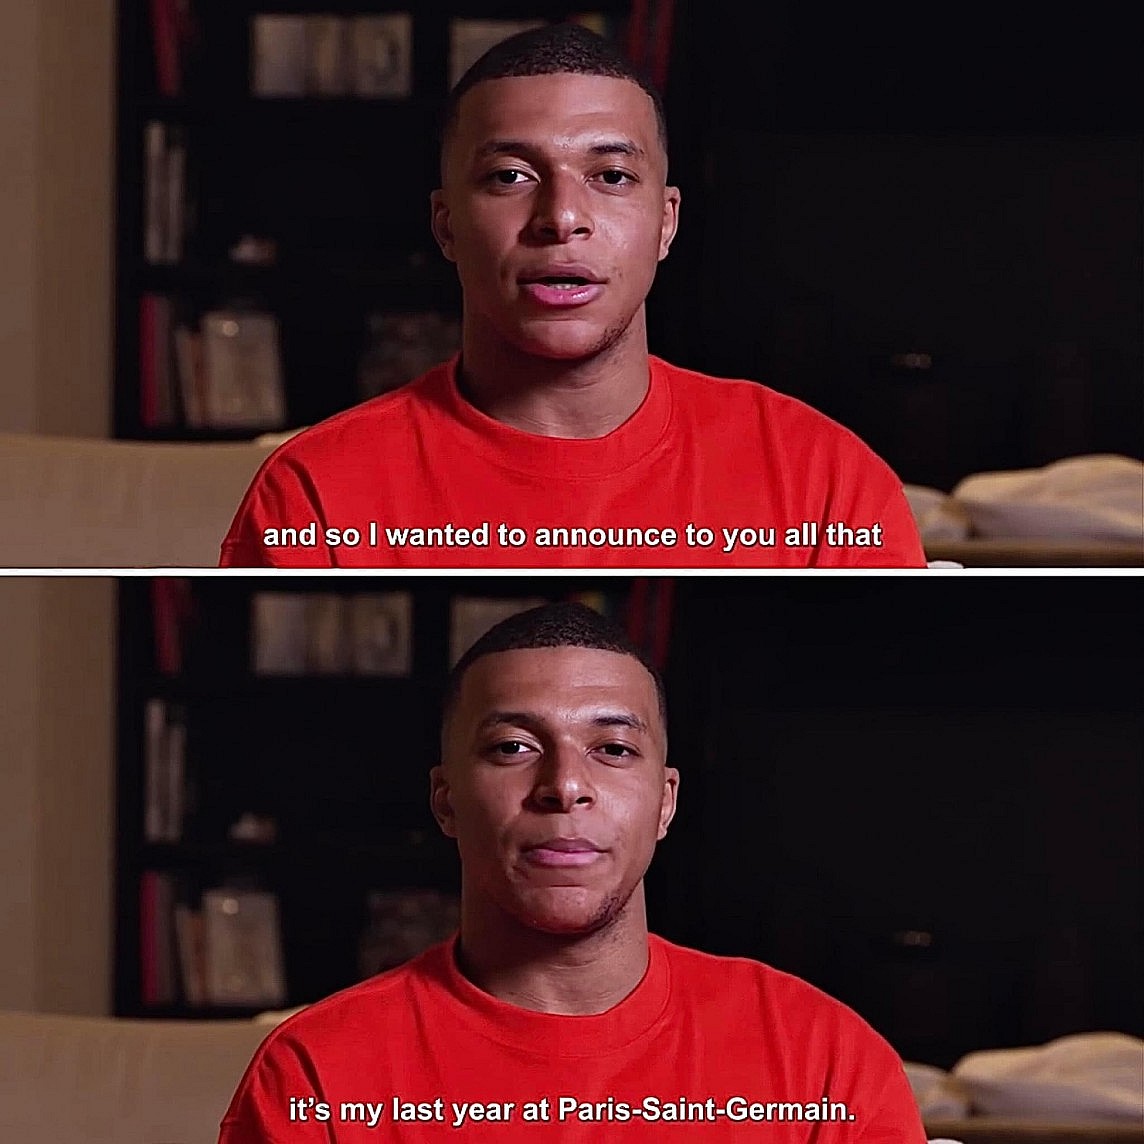 Looking back at Mbappe's 7-year journey at PSG